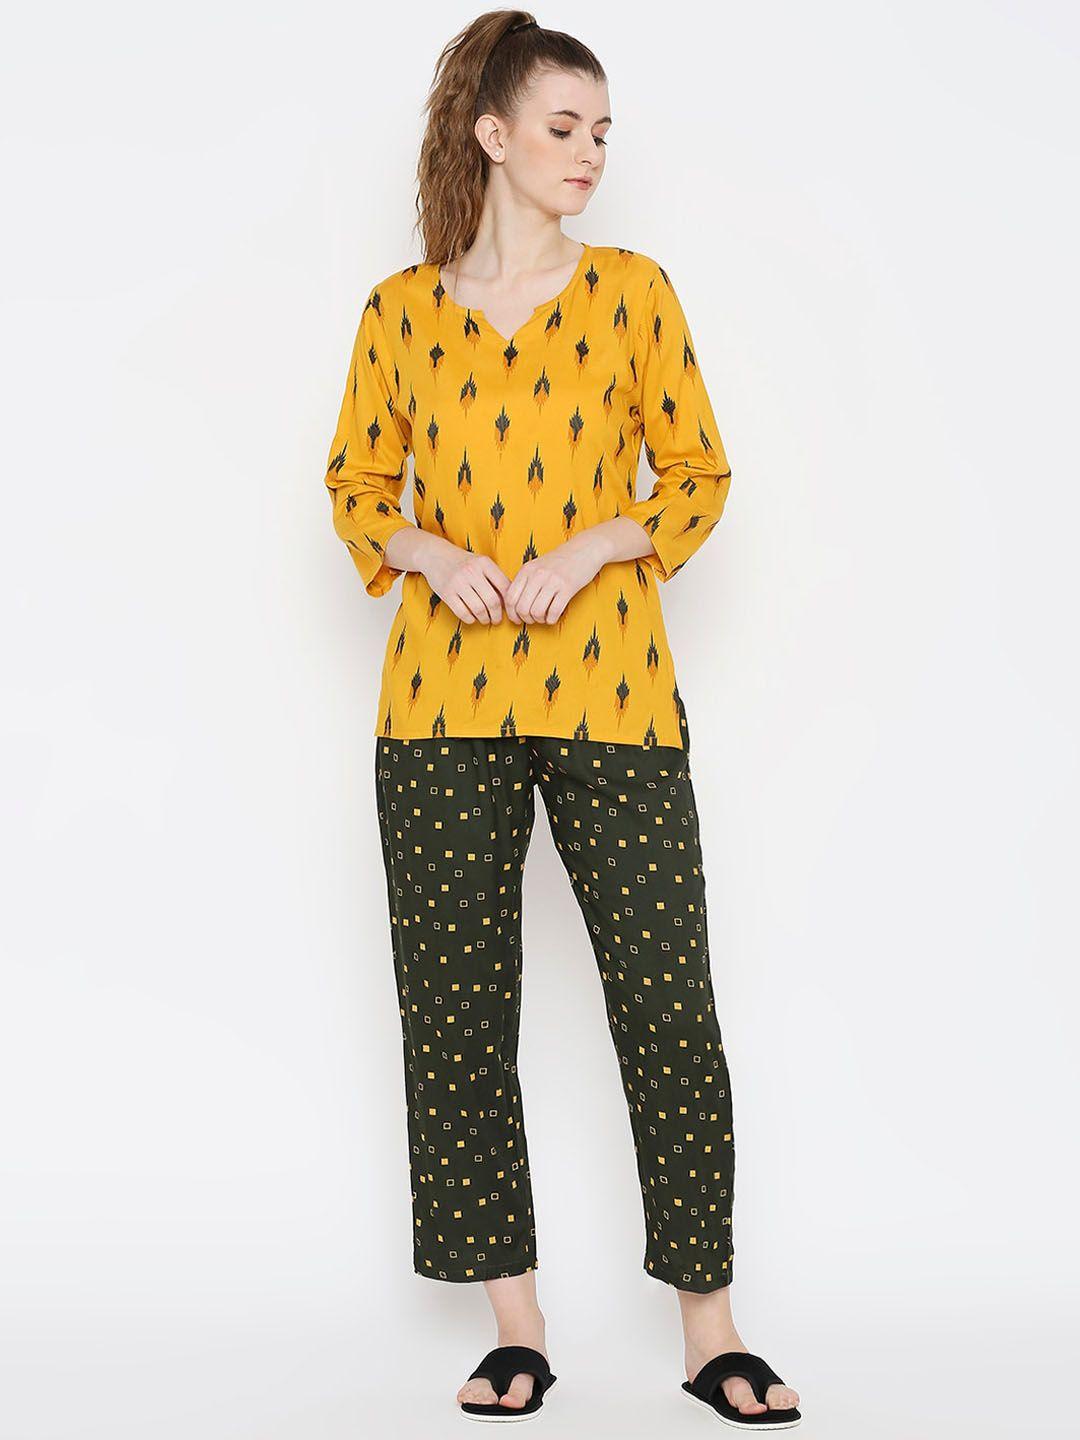 smarty pants women yellow & olive green printed night suit